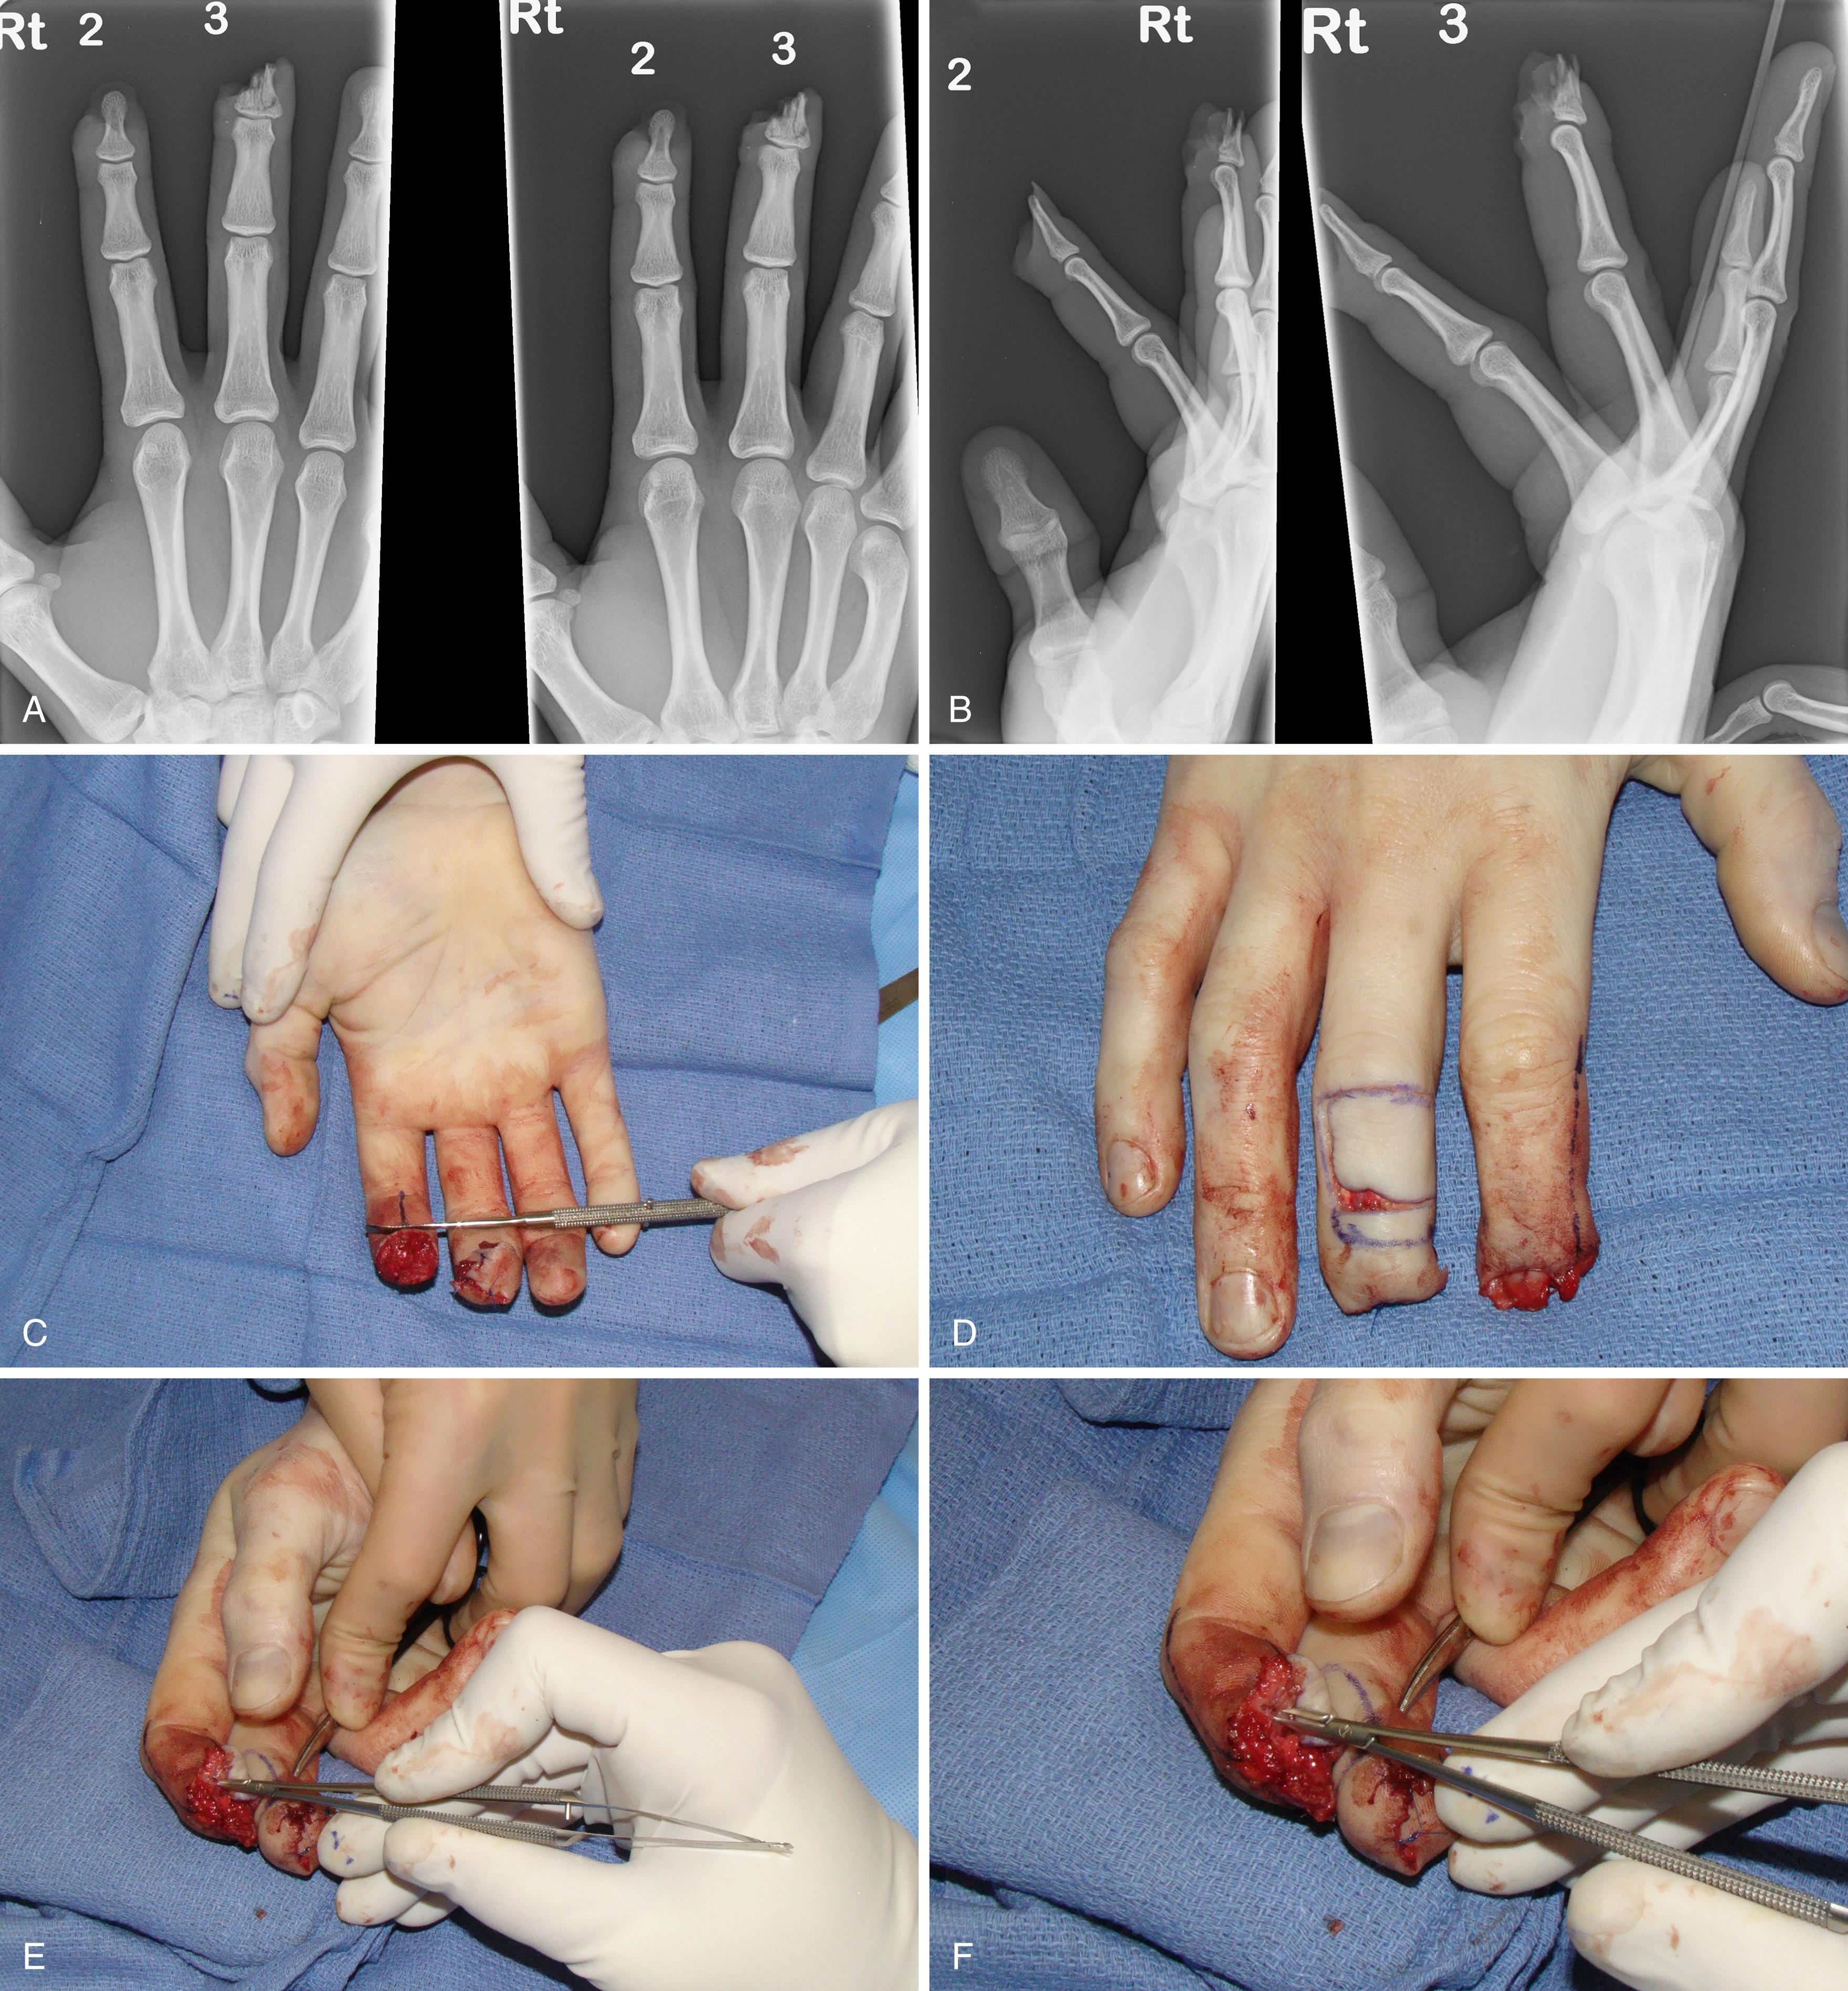 Fig. 49.8, Cross-finger flap for loss of palmar skin to index finger after crush injury to index and long fingers. A and B, Radiographs demonstrating index and middle finger tip injuries. C, Index finger tip skin loss and open wound. D to G, Radial based dorsal flap from middle finger to index finger for tip coverage with dorsal sensory nerve from ulnar/dorsal middle finger and coaptation to distal index radial digital nerve. H to J, Three month follow-up demonstrates satisfactory motion and improving radial index finger sensation.